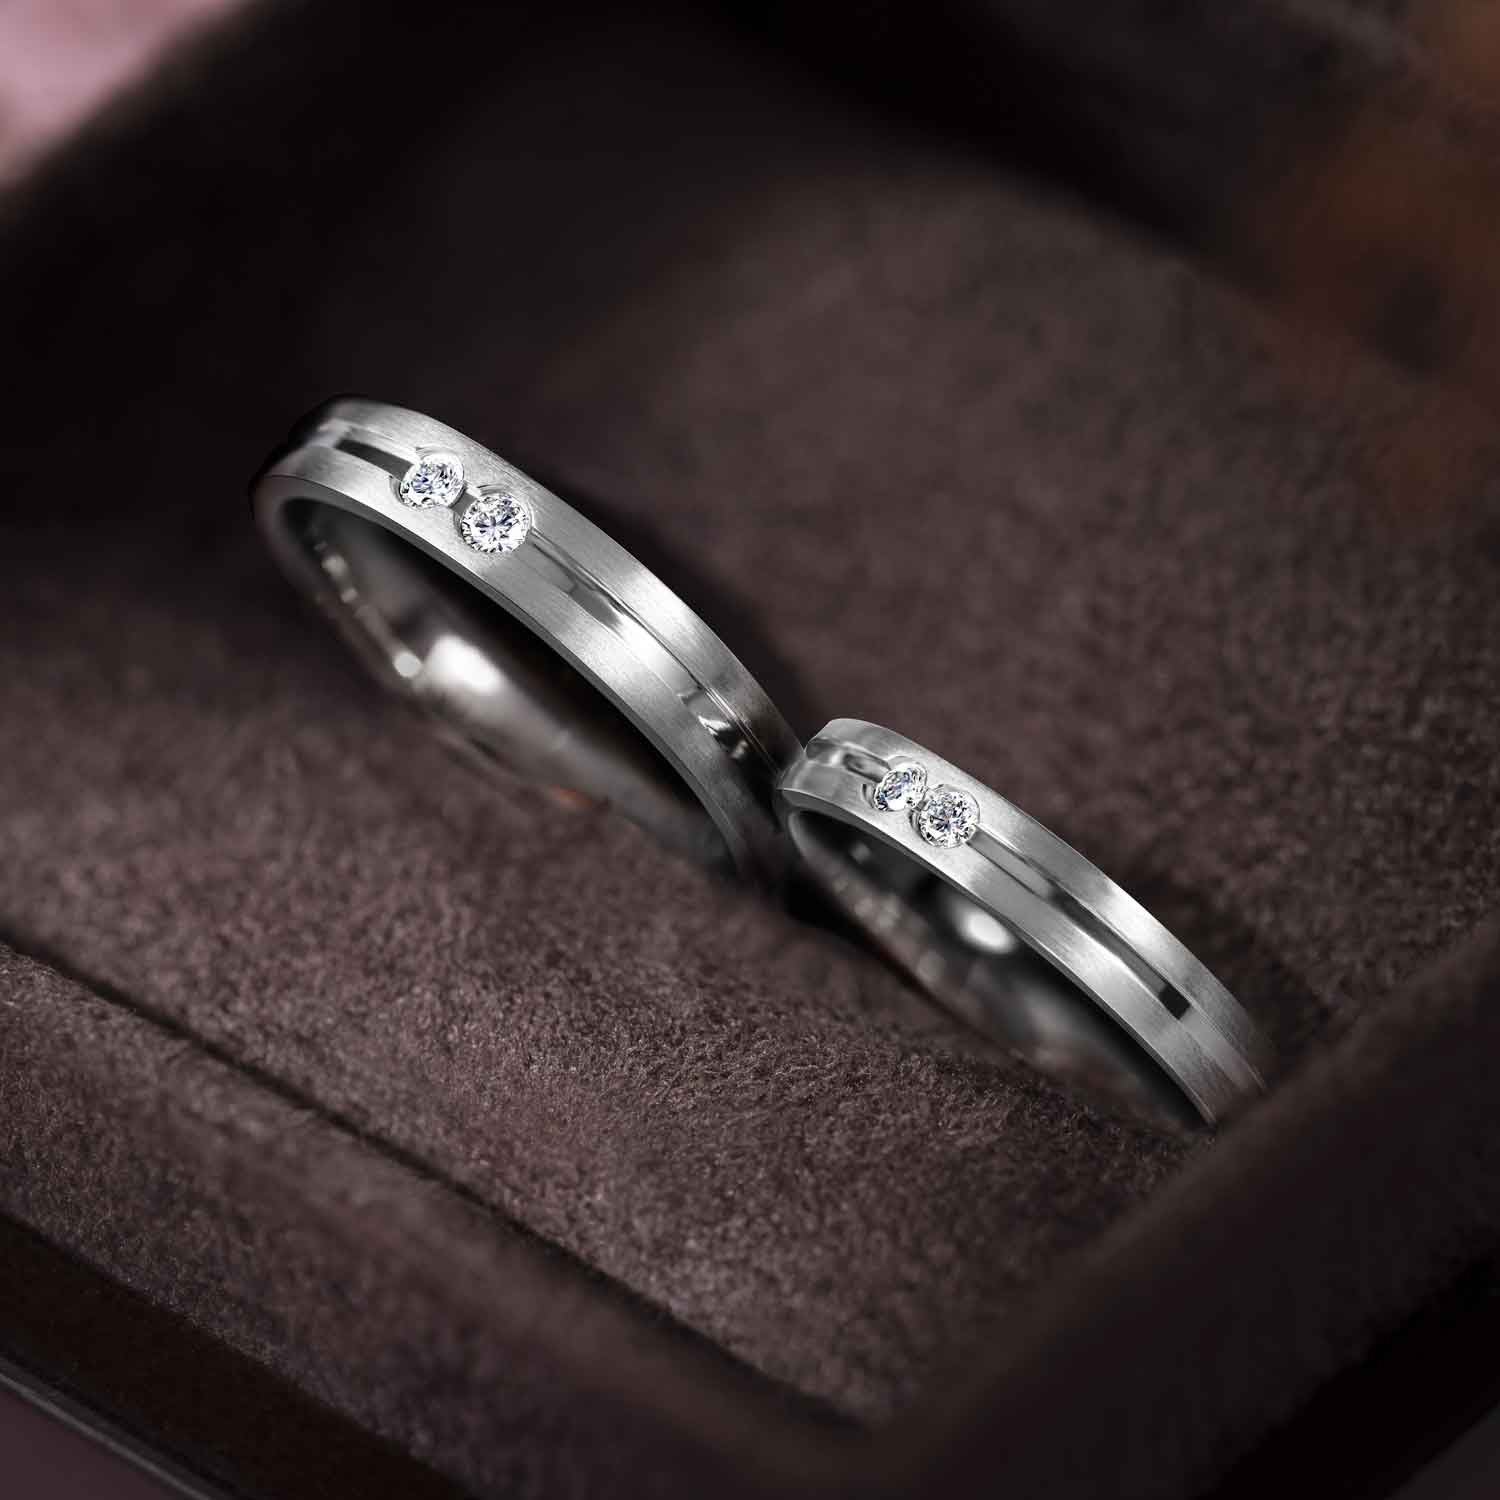 Personalized Black & Silver Stainless Steel Band Promise Ring Set Custom  Engraved - Ships from USA|Amazon.com